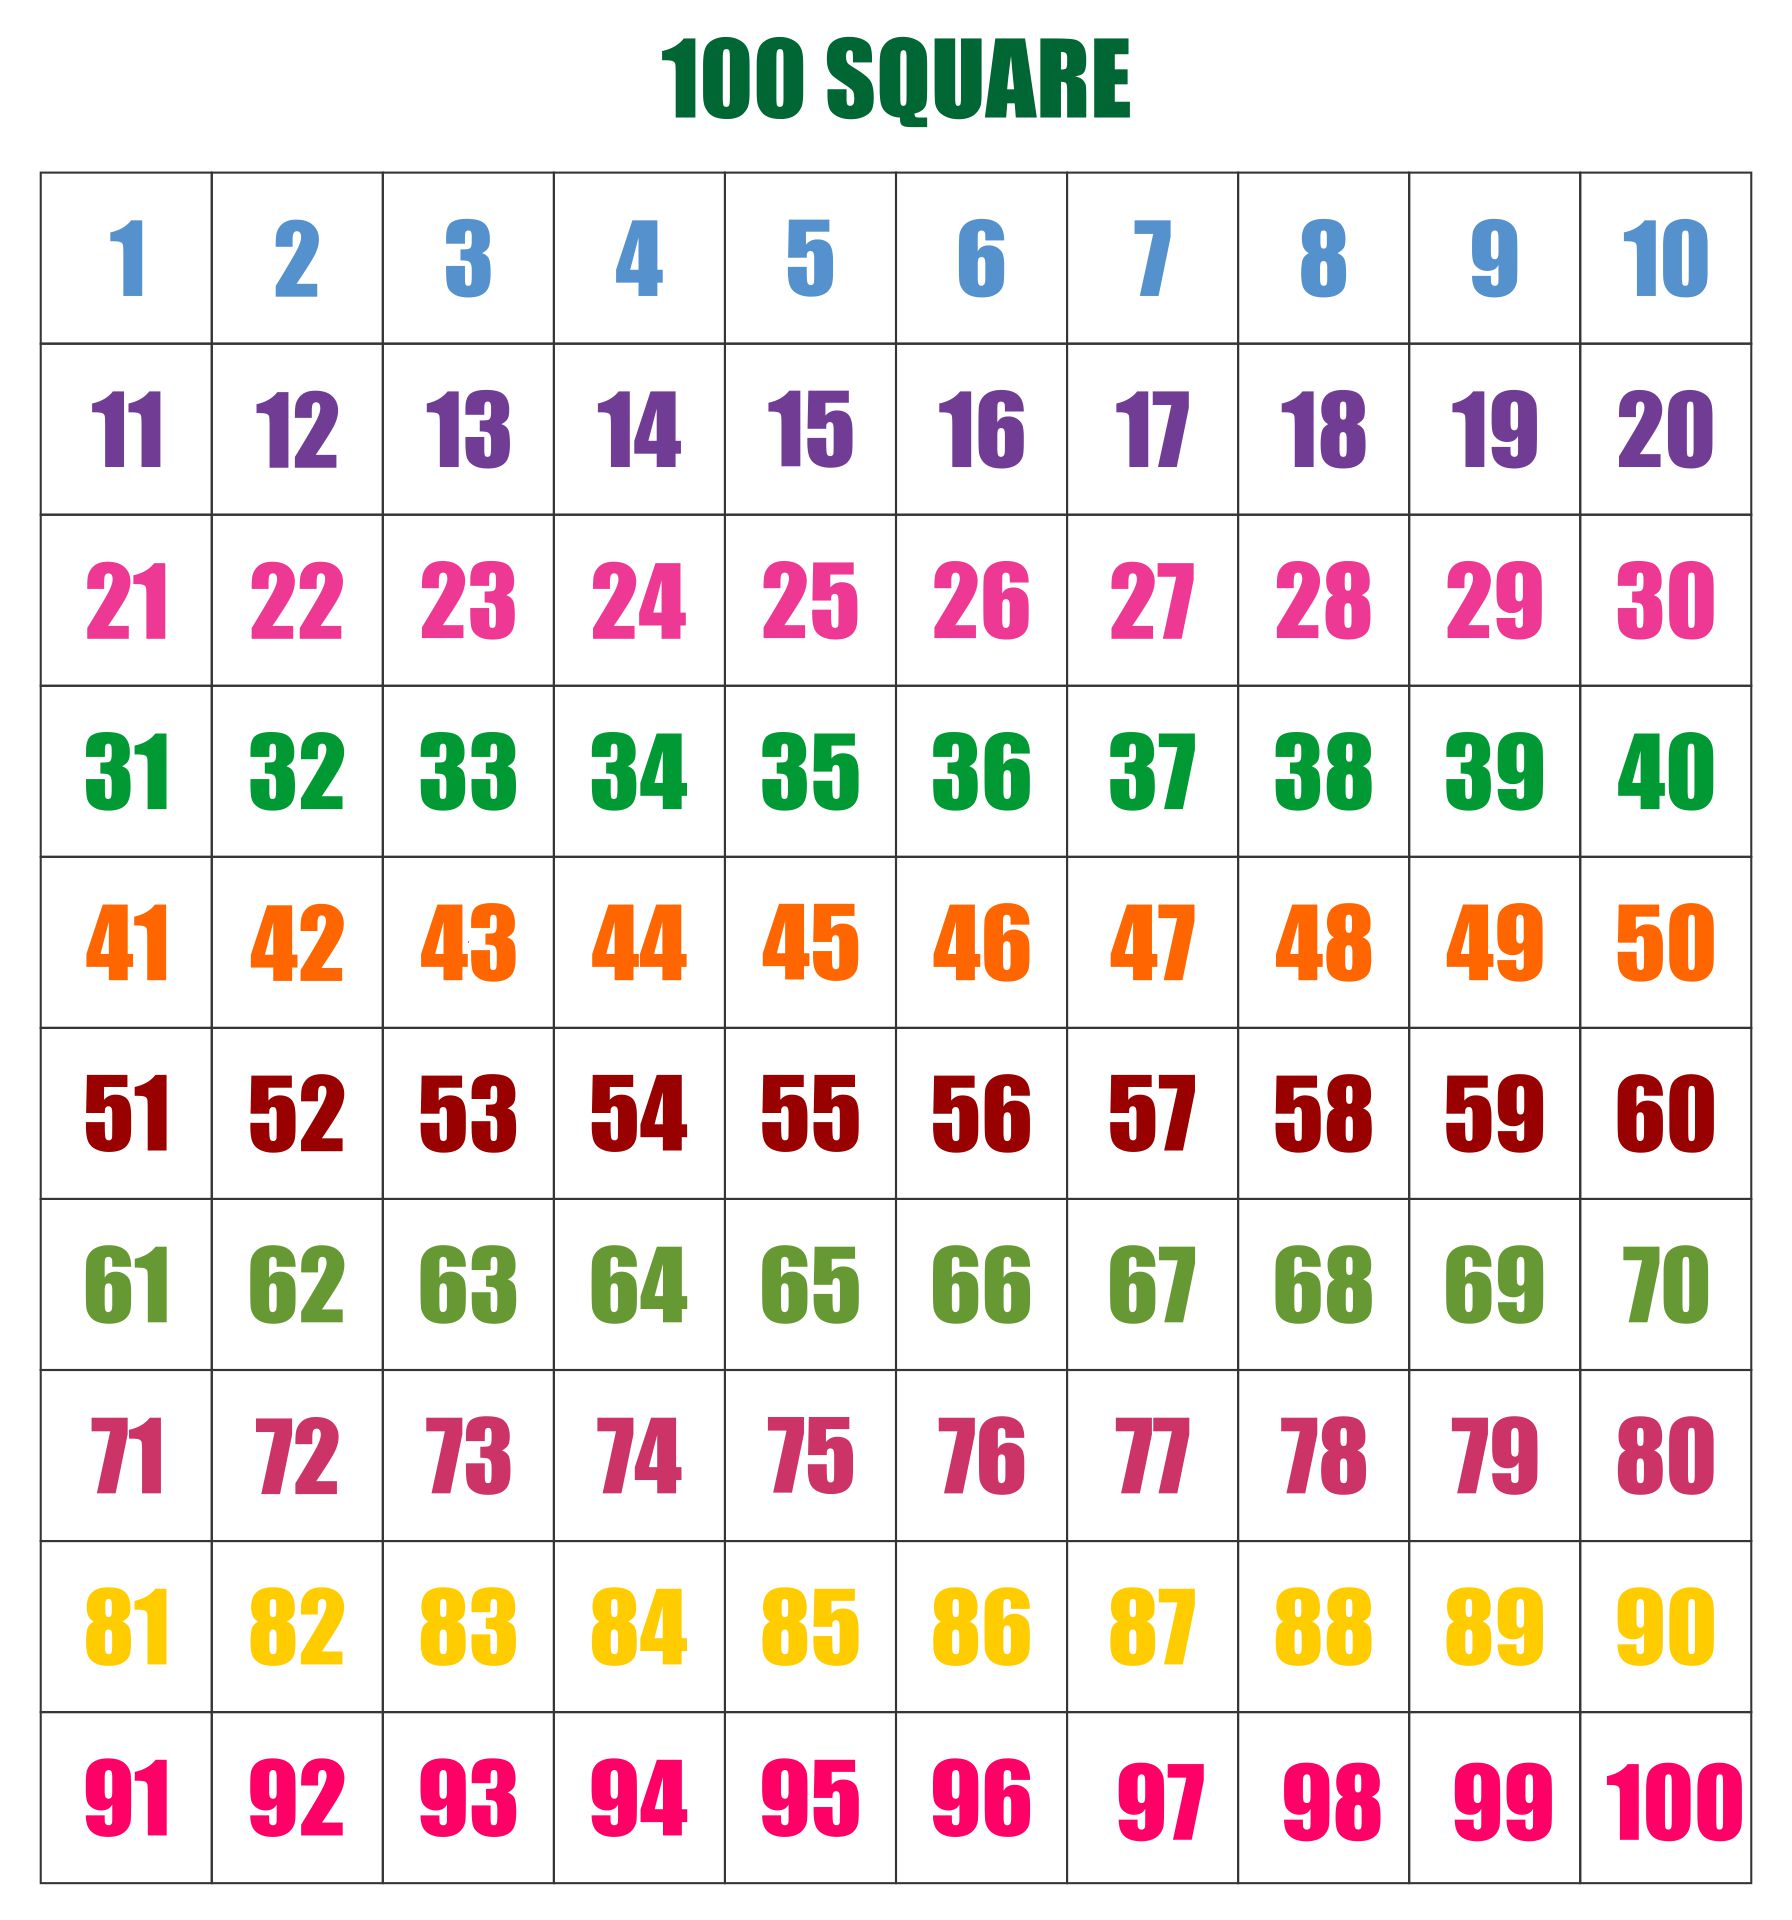 6 Best Images of Printable Hundred Square Printable 100 Square